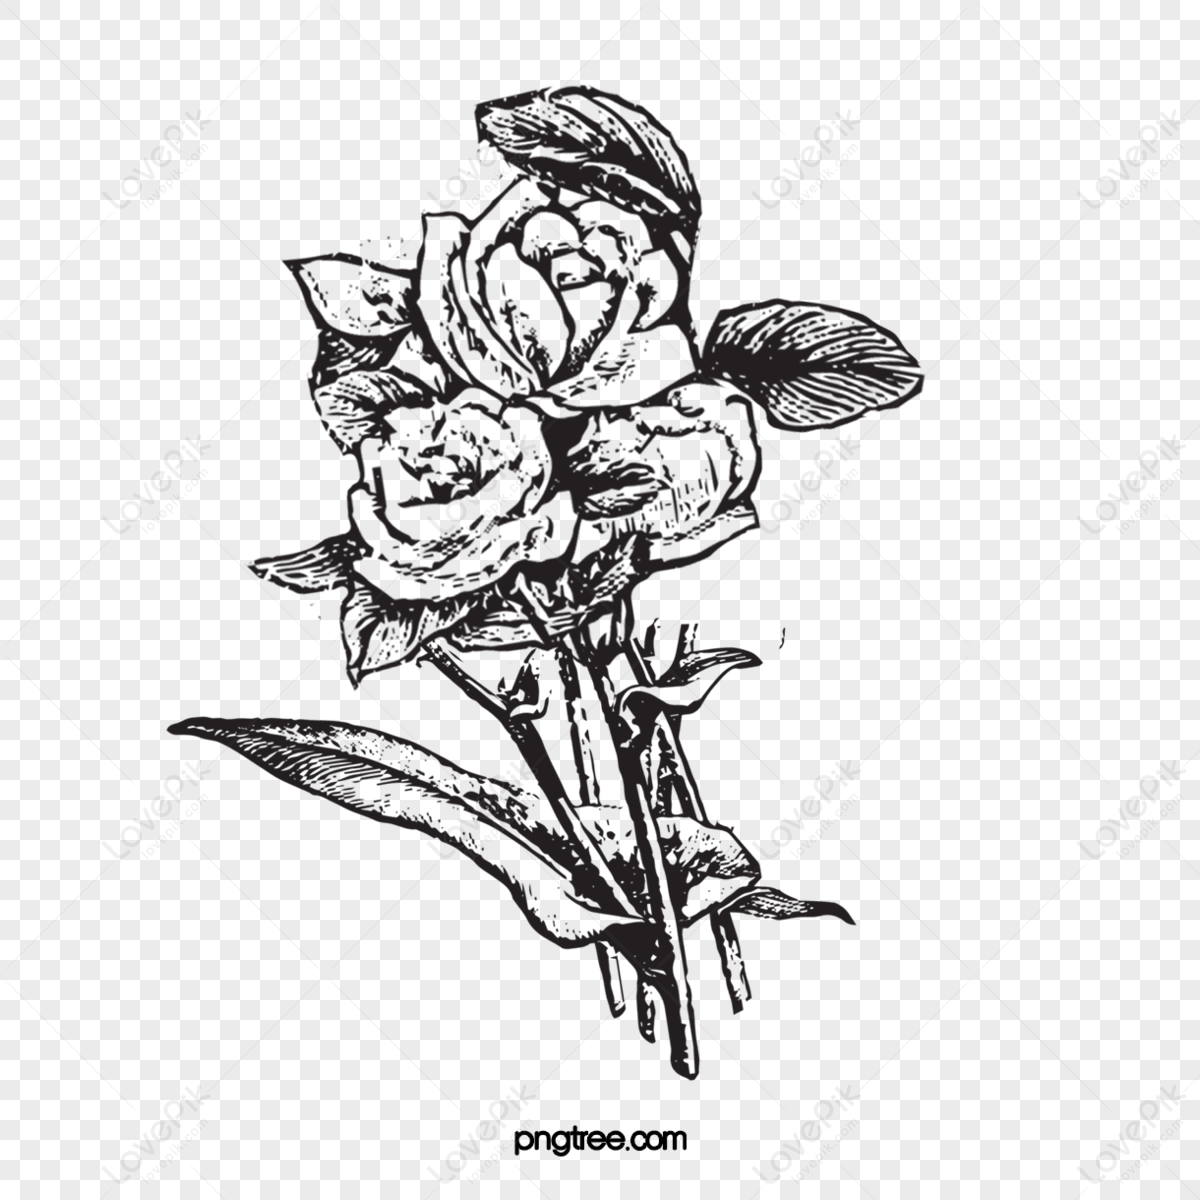 Rose flower sketch engraving vector illustration. Scratch board style  imitation. Black and white hand drawn image. - Stock Image - Everypixel